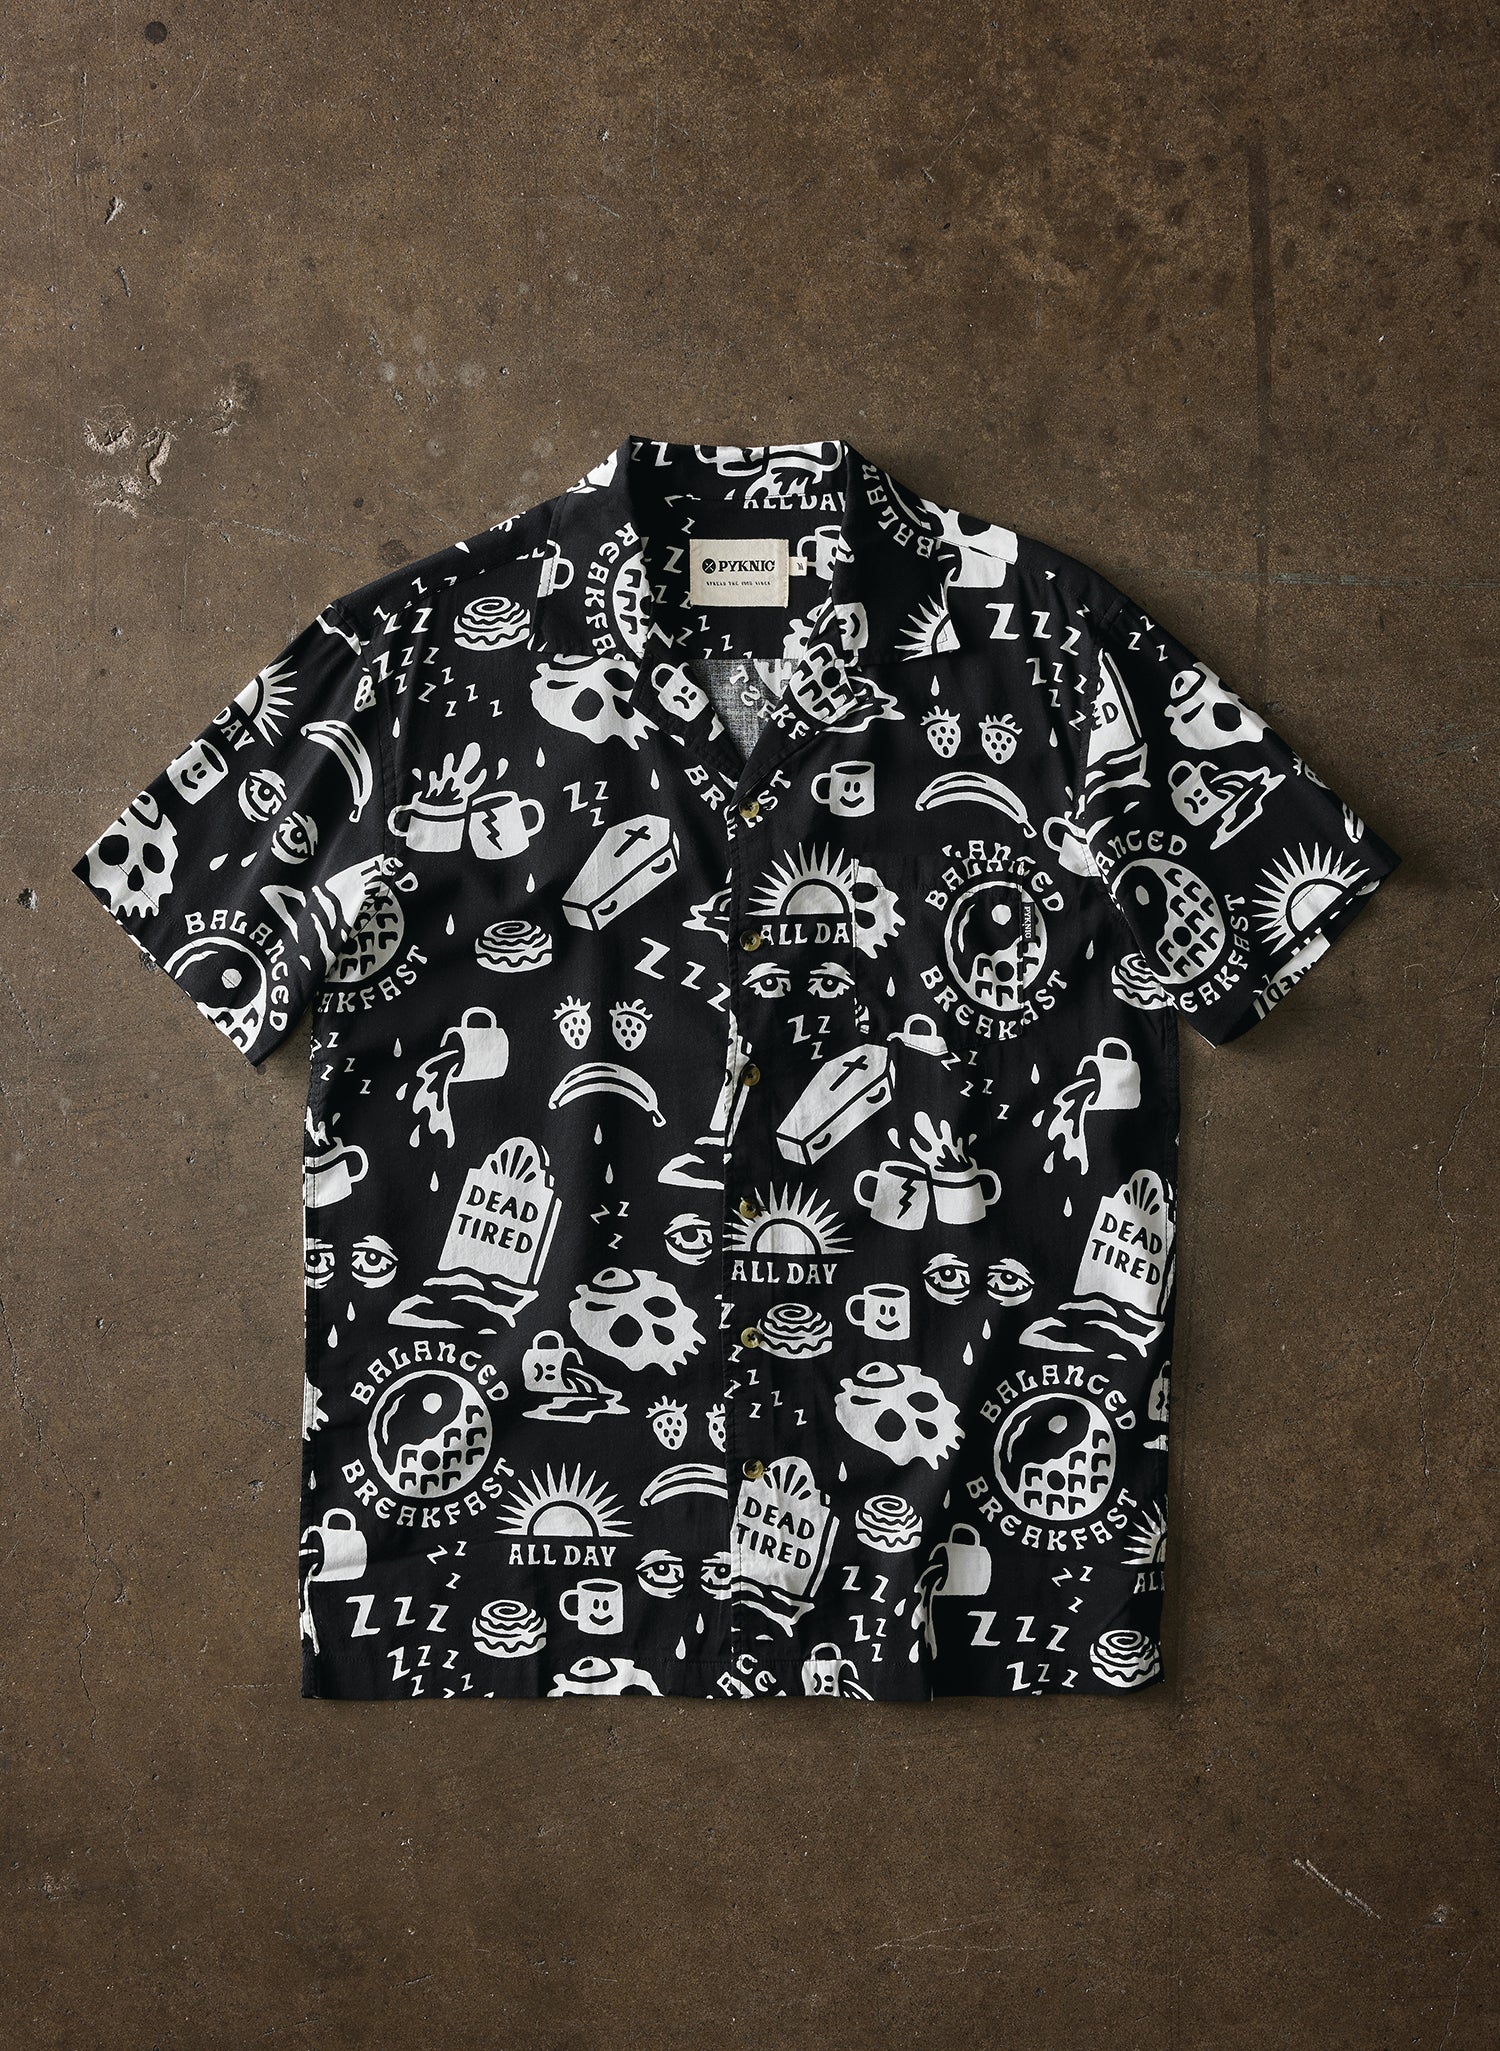 Pyknic | Dead Tired Vacation Casual Button-Up Shirt | Button Down Shirt with All Over Graphic Print, Black Coffee Shirt, Breakfast Lover Shirt,Best Foodie Shirt, Best Foodie Gift, Food Themed Apparel, Food Tattoo Flash, Always Tired Button Down Shirt, Cool Button Up Shirts, Alternative Lifestyle Brand, Motorcycle Lifestyle Brand